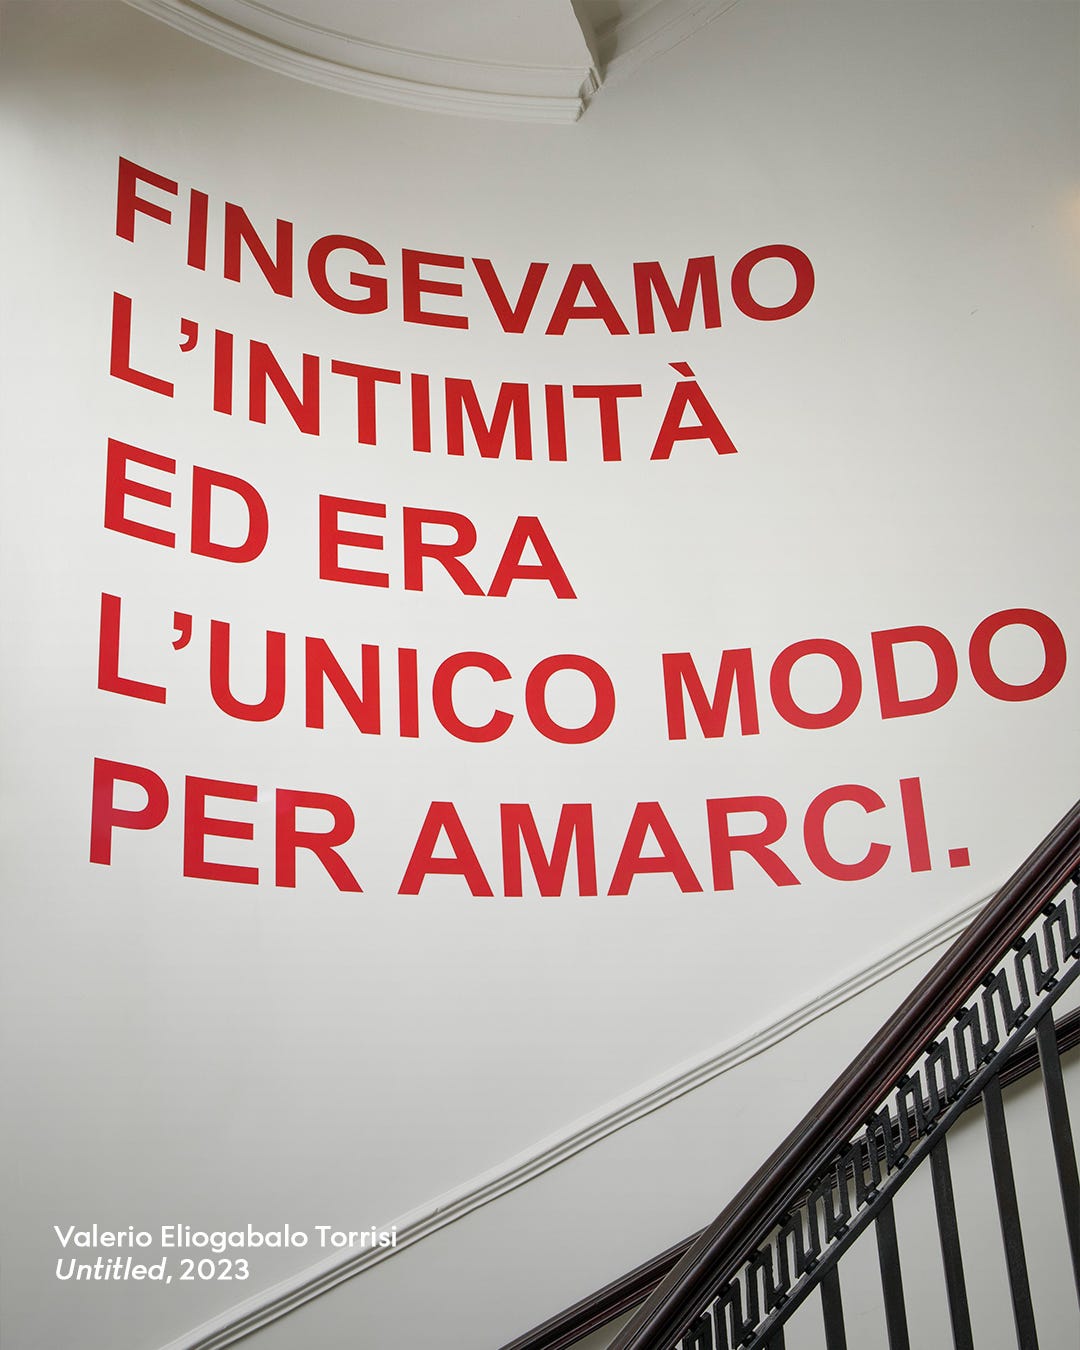 "Fingevamo l'intimità ed era l'unica modo per amarci" is written in red on a white wall in front of an iron spiral staircase. 